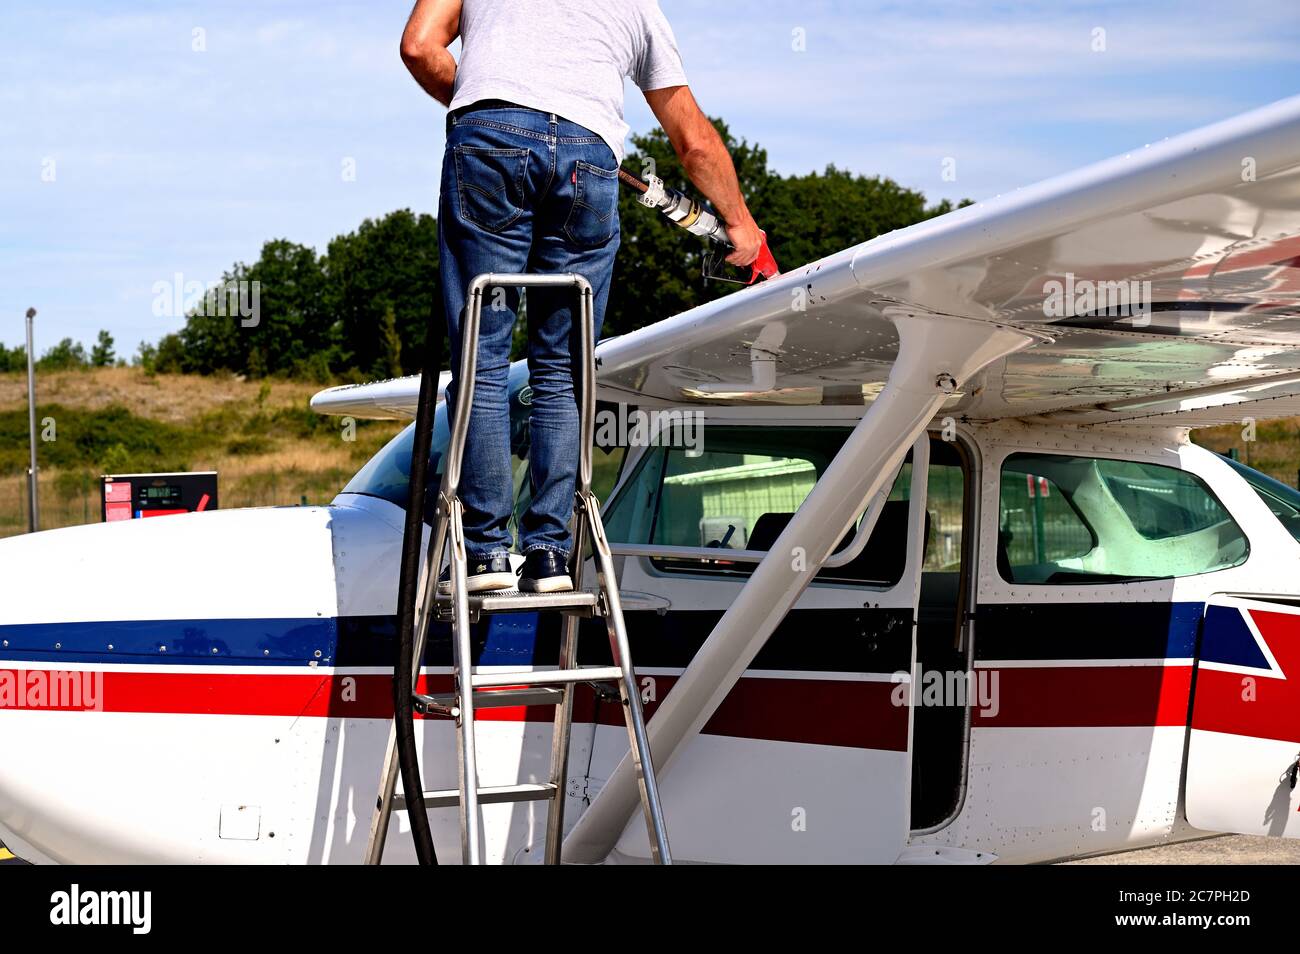 A private plane on the tarmac being refueled Stock Photo